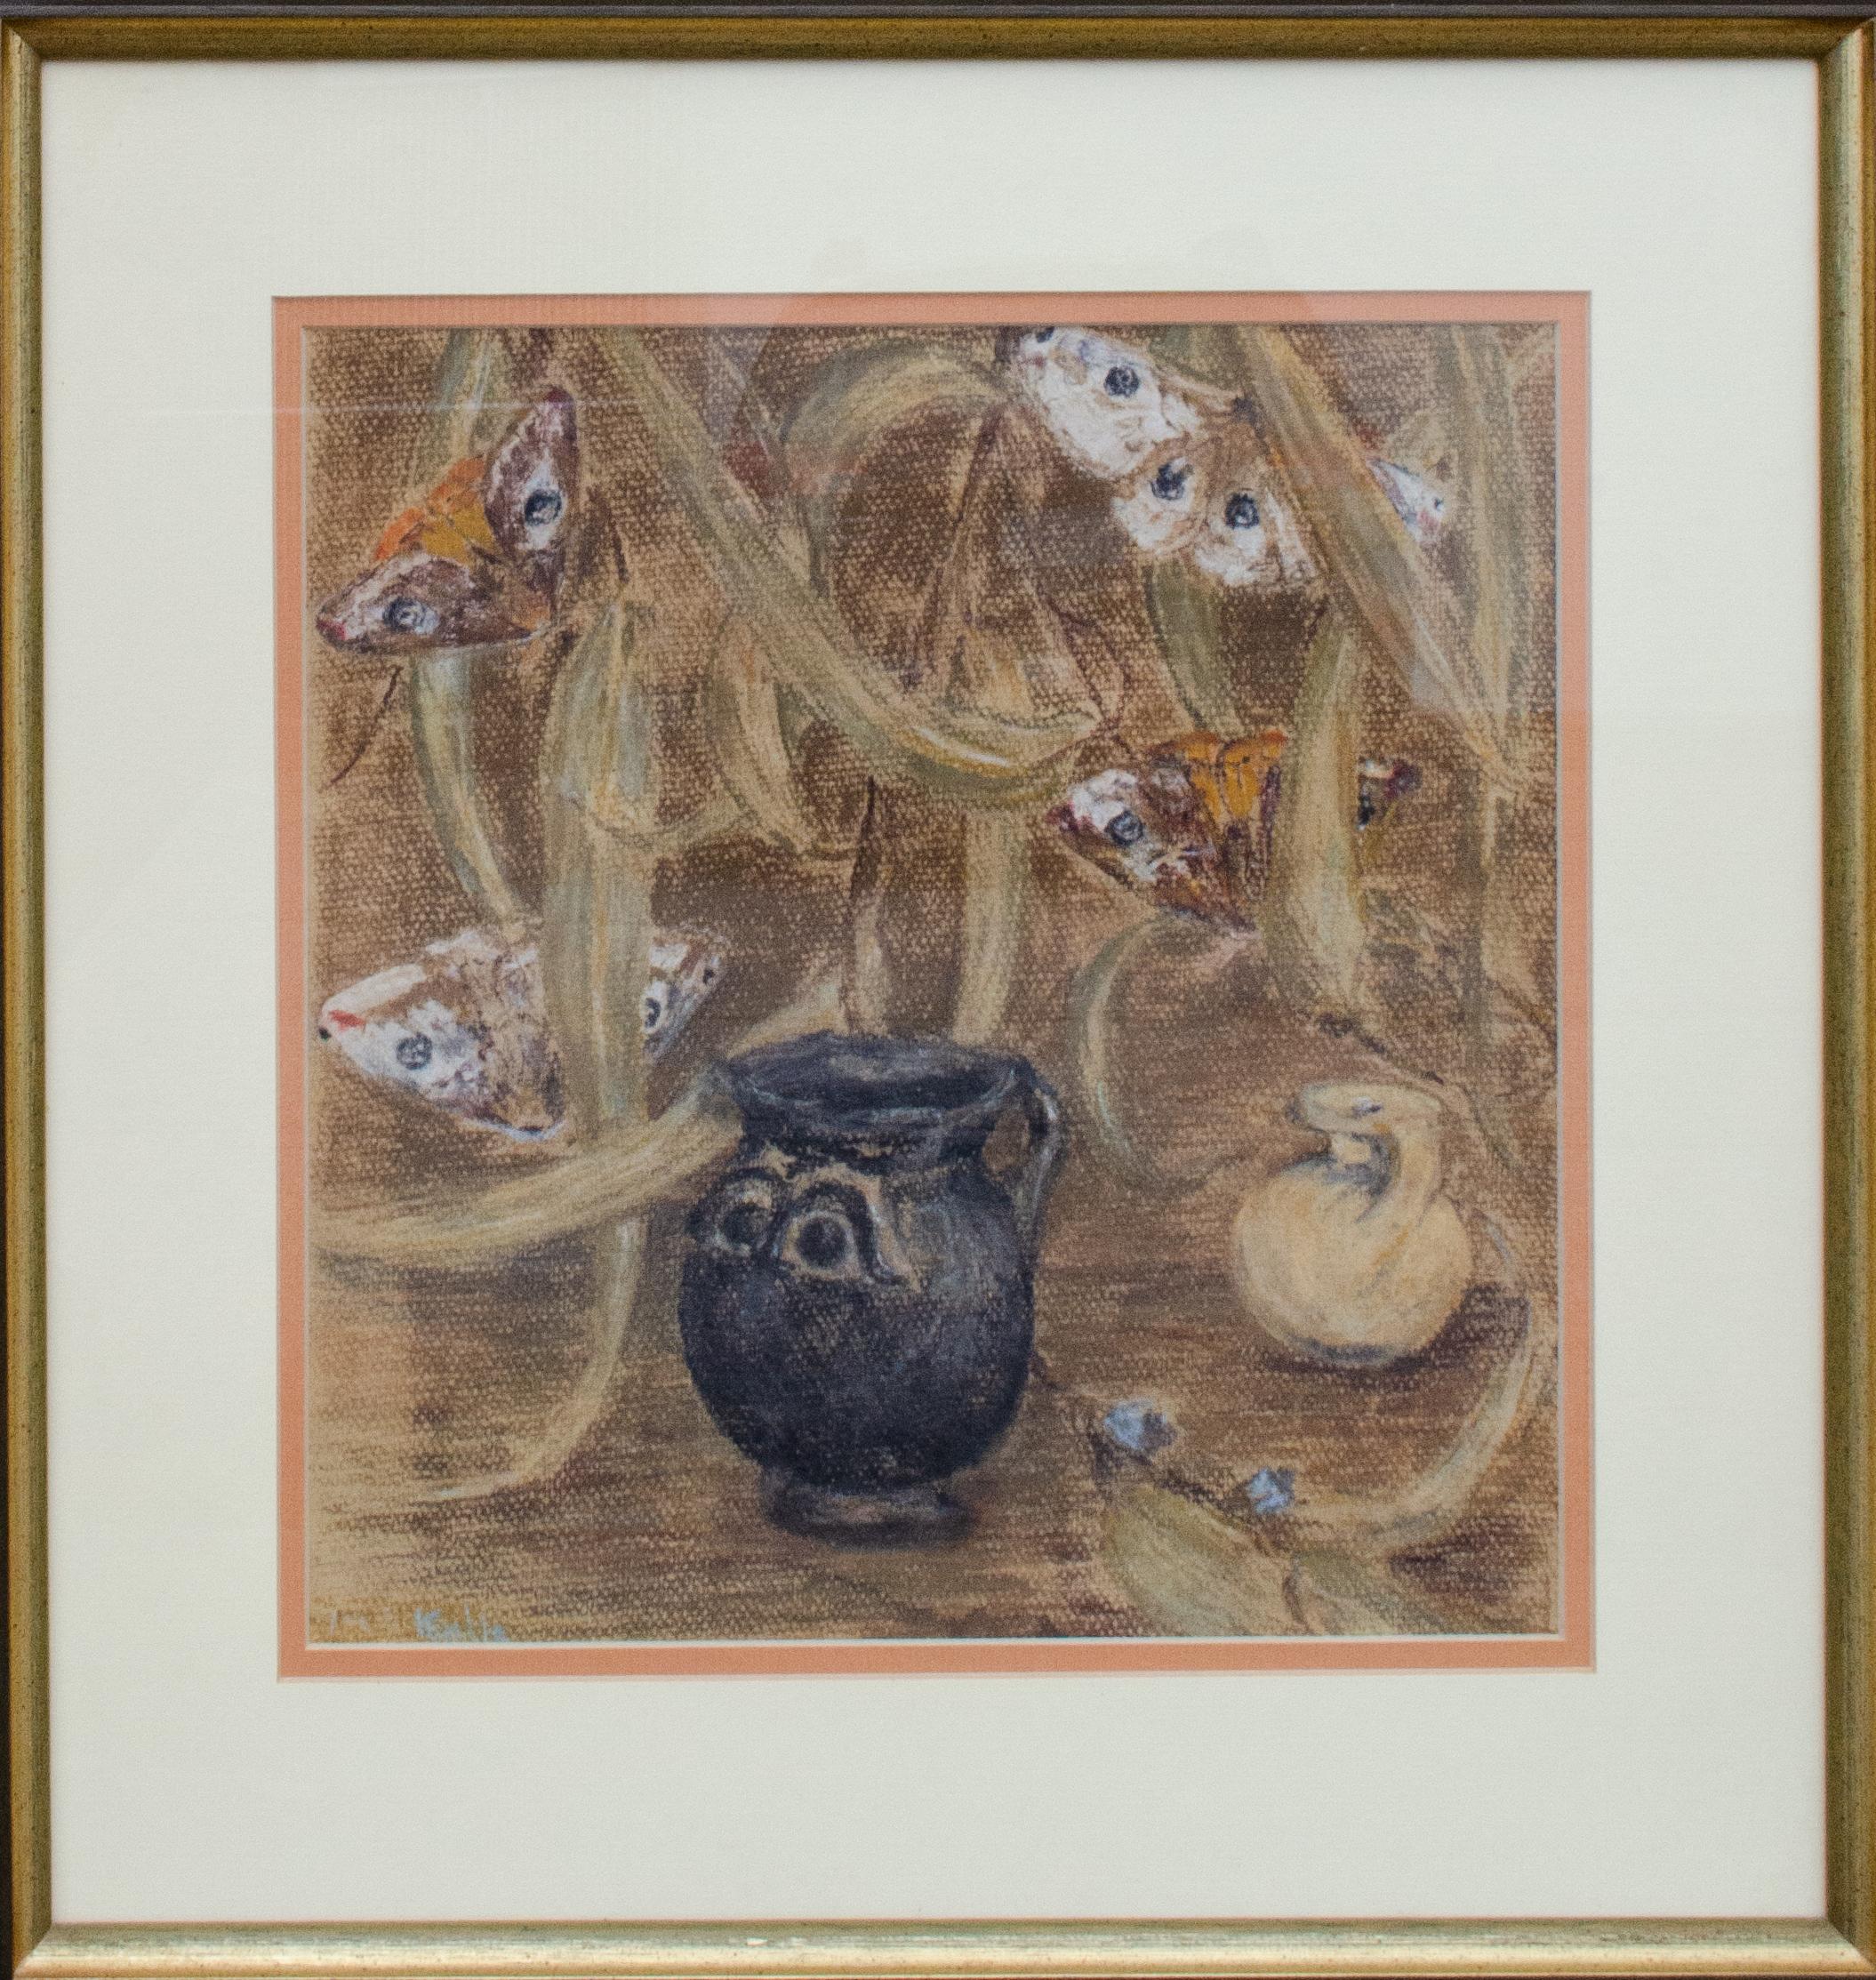 Unknown Figurative Art - Adorable Pastel of Moths and Pots by Mystery Artist